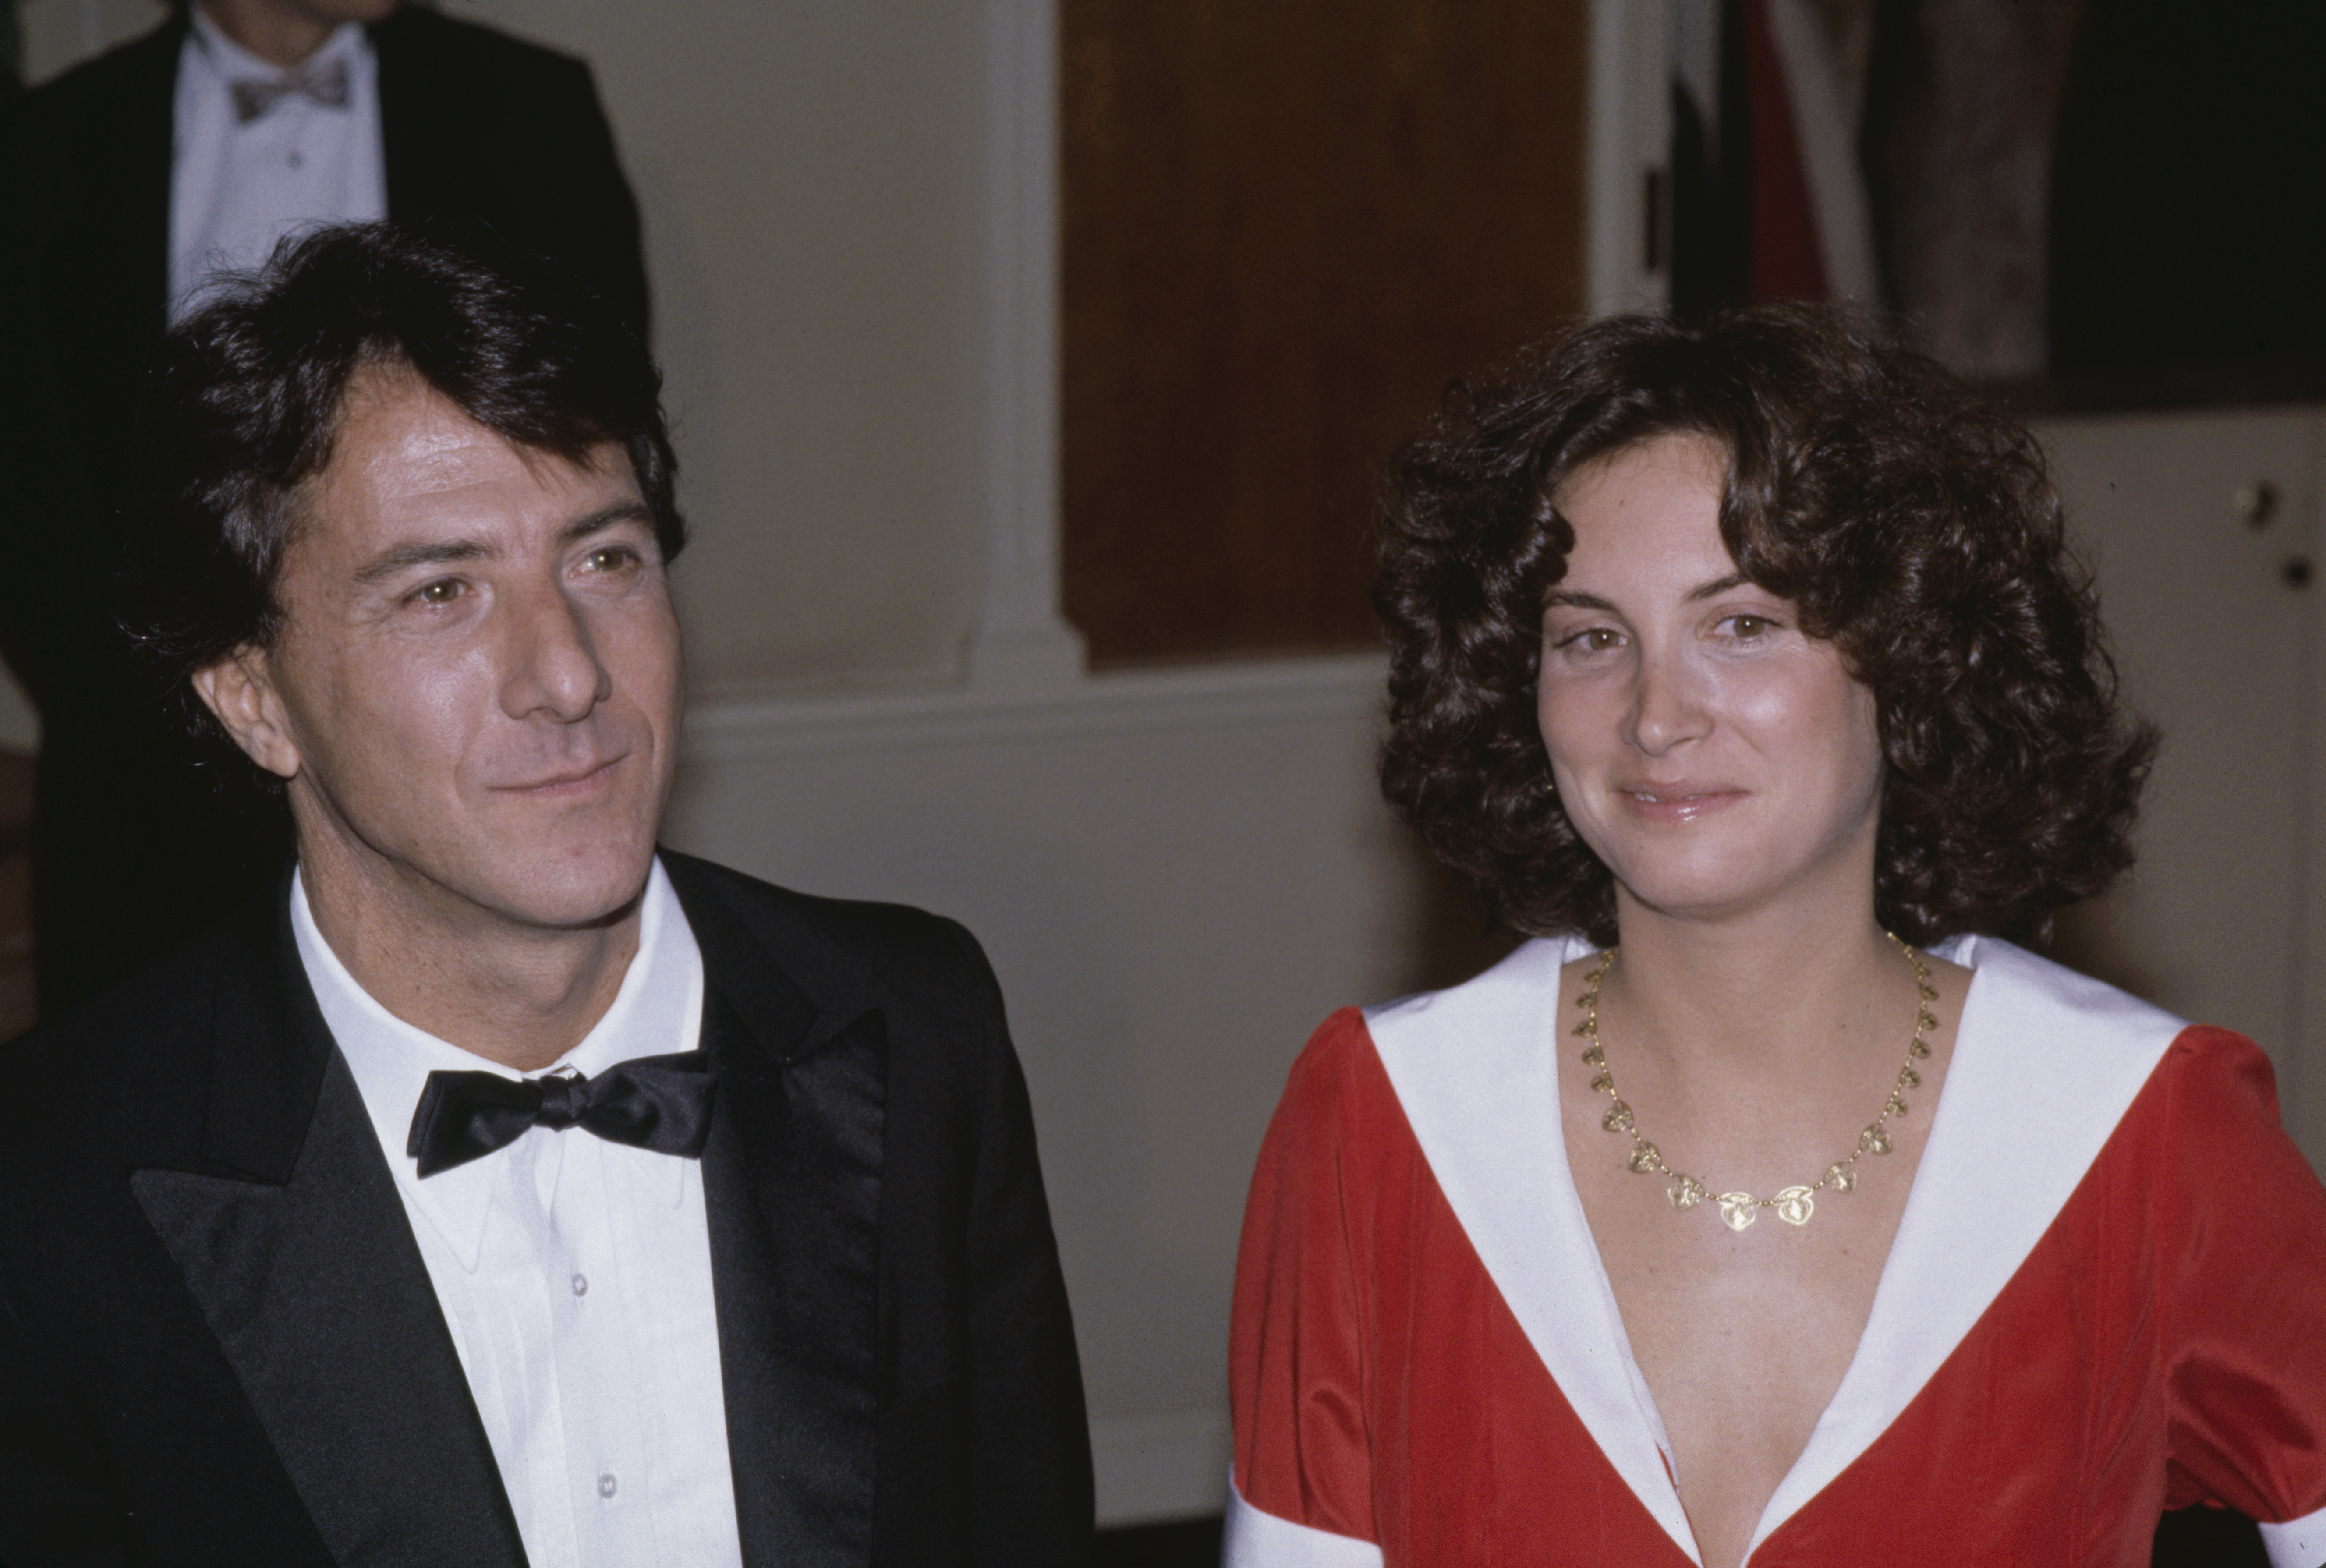 The actor and the woman at the 40th Annual Golden Globe Awards in Beverly Hills, California on January 29, 1983. | Source: Getty Images